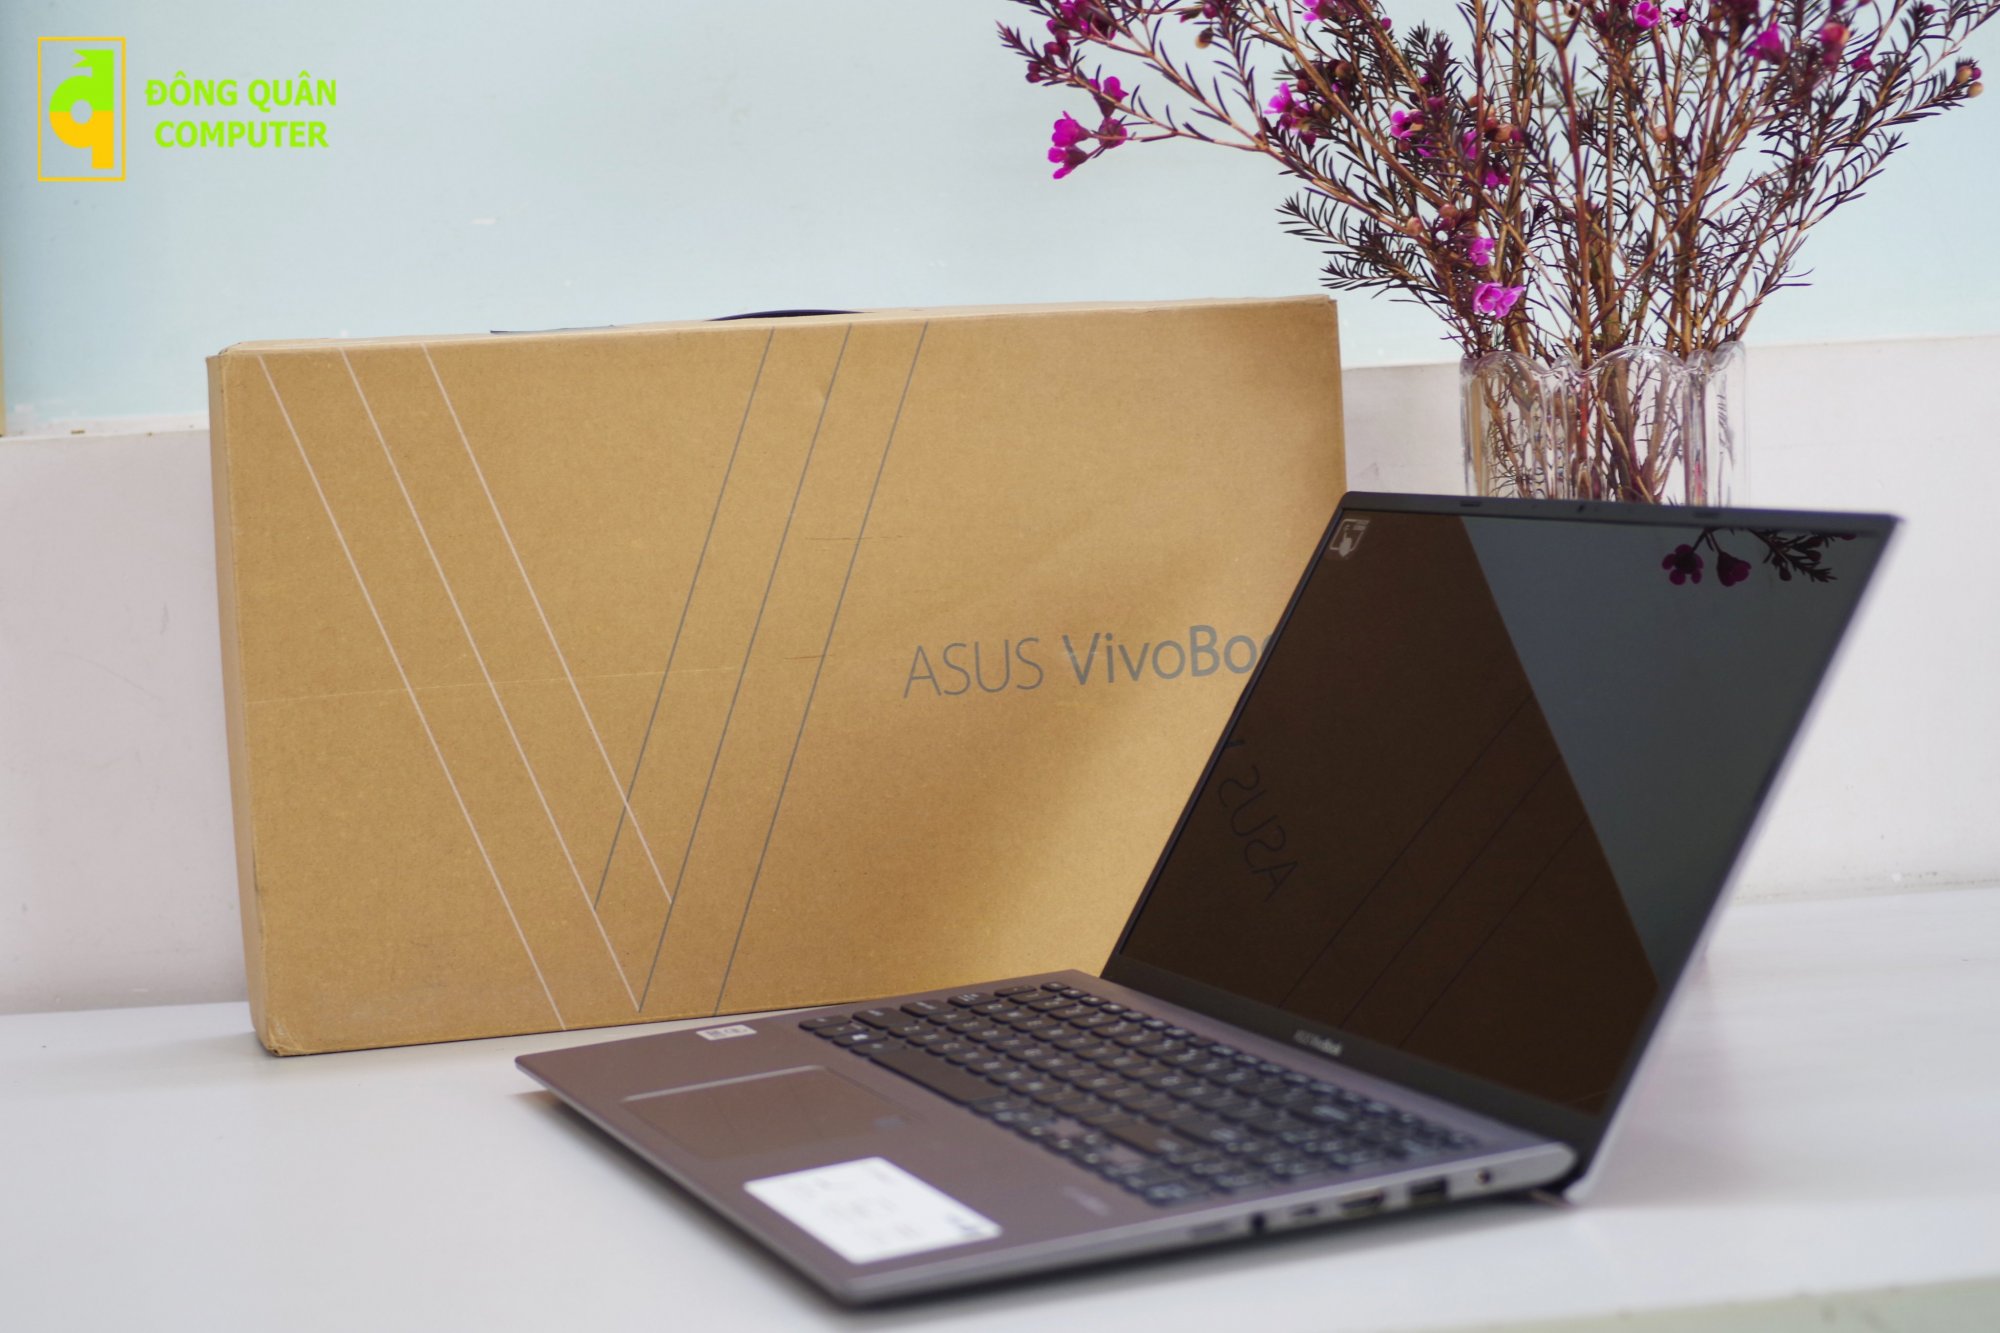 Laptop Asus Vivobook R564JA-UH31T core i3-1005G1 /4G Ram /128G SSD /15.6" FHD /Touch /WC /Win 11 /Slate Gray (Like New)